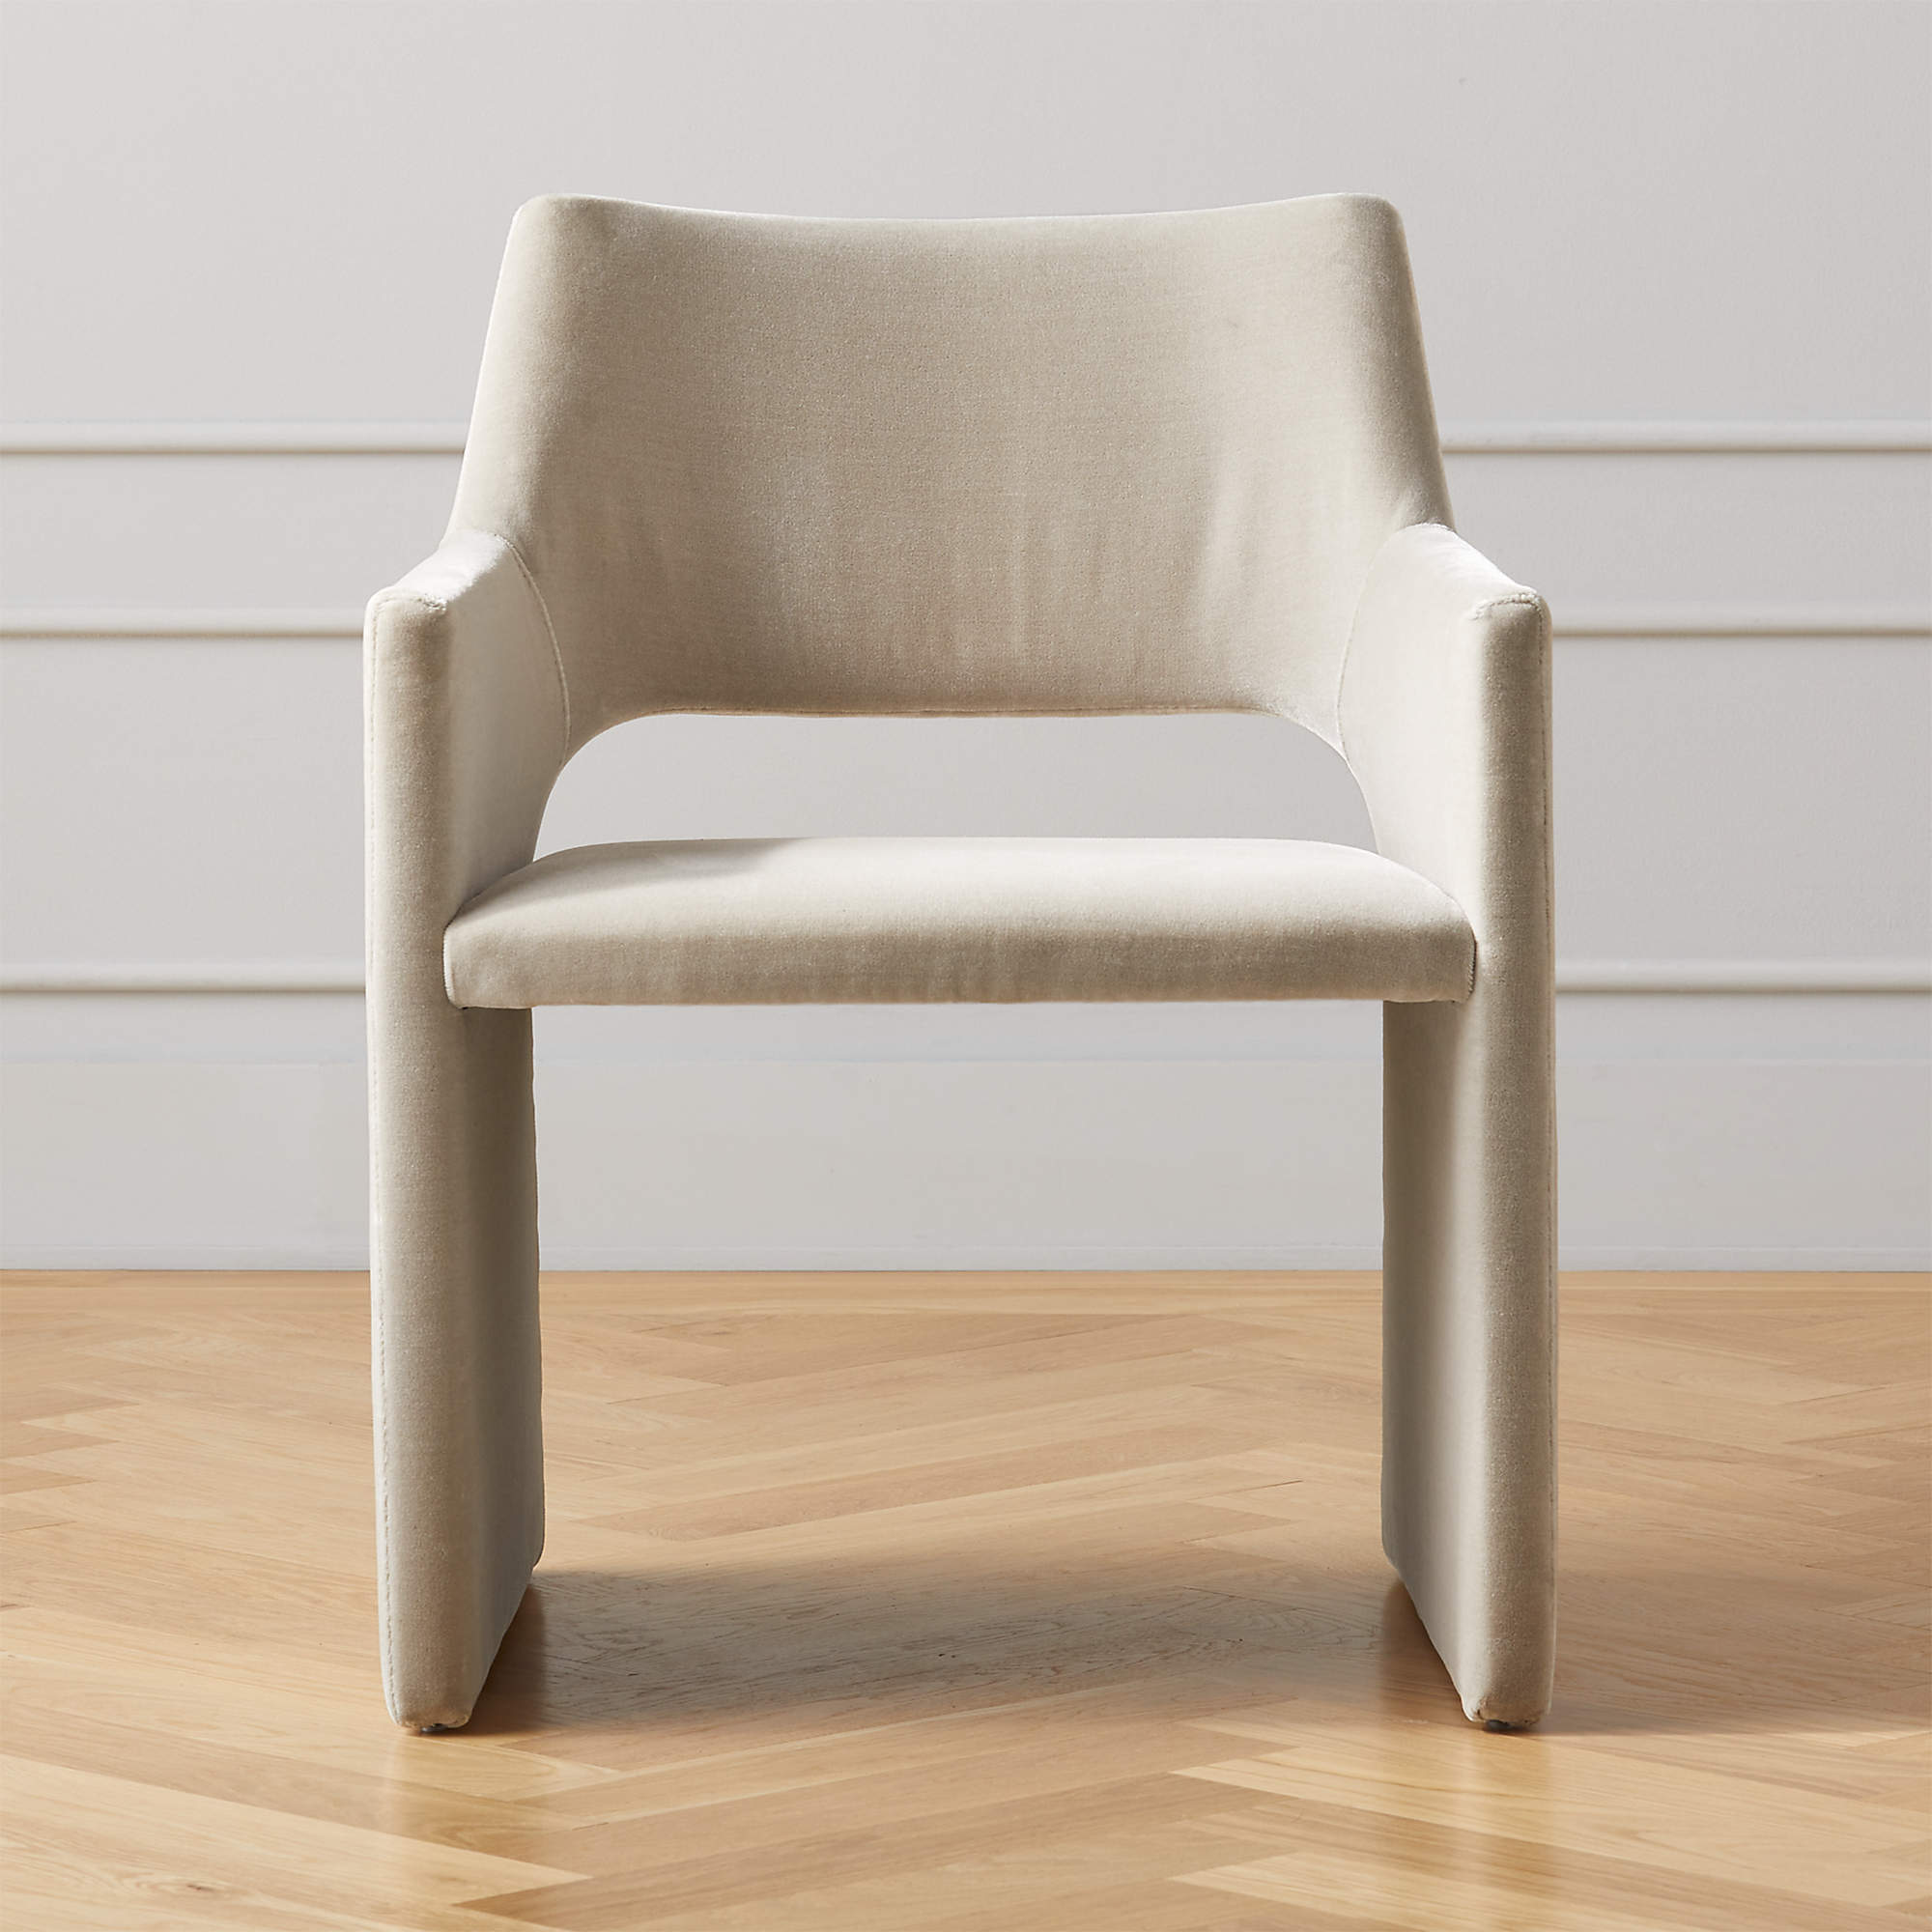 designer dupe chairs